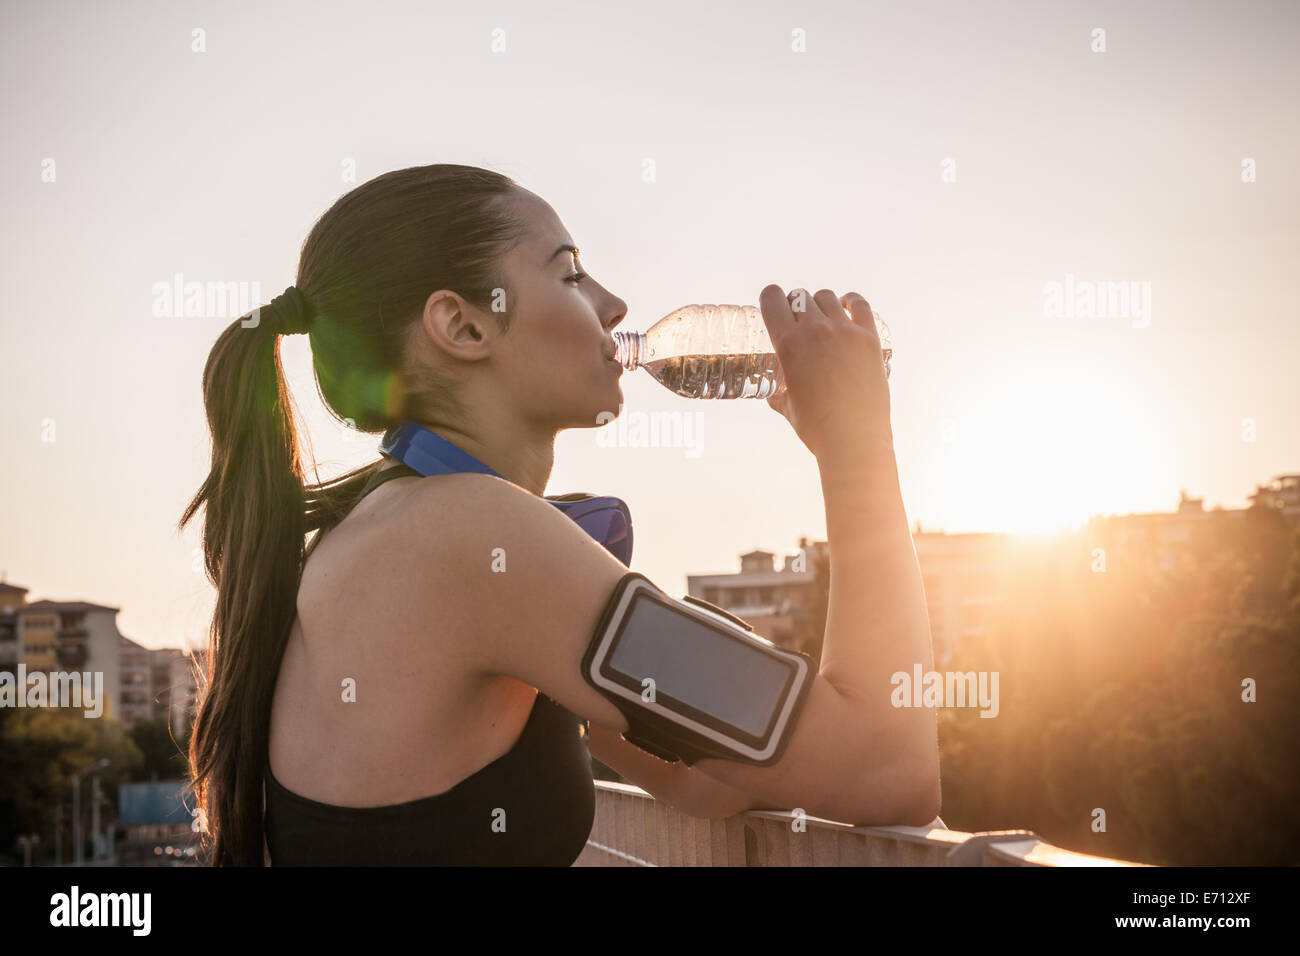 Young woman wearing armband drinking water Stock Photo